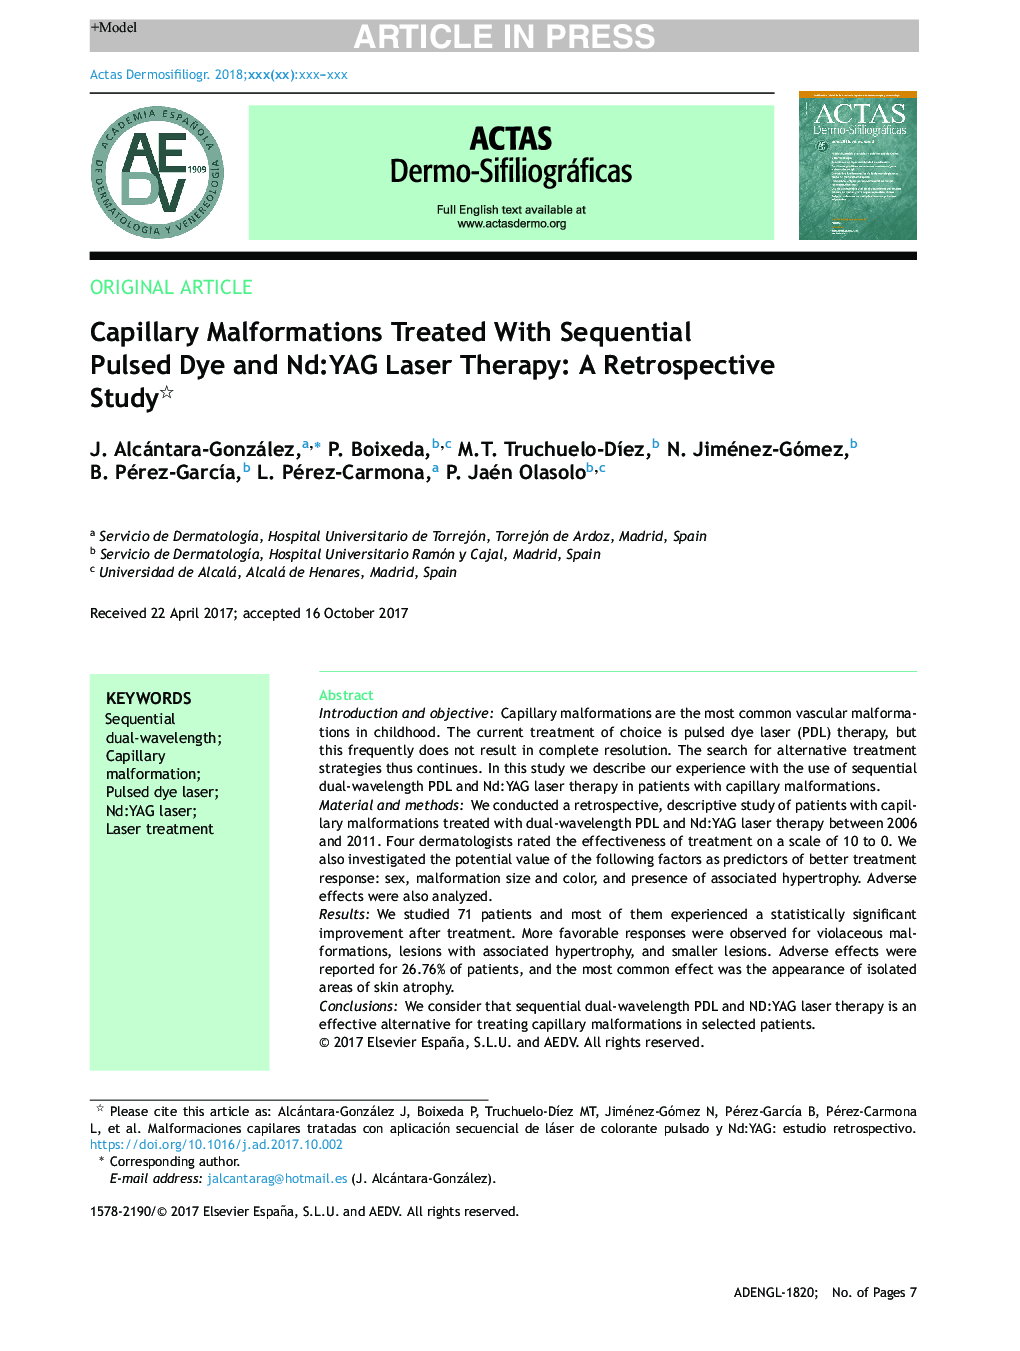 Capillary Malformations Treated With Sequential Pulsed Dye and Nd:YAG Laser Therapy: A Retrospective Study